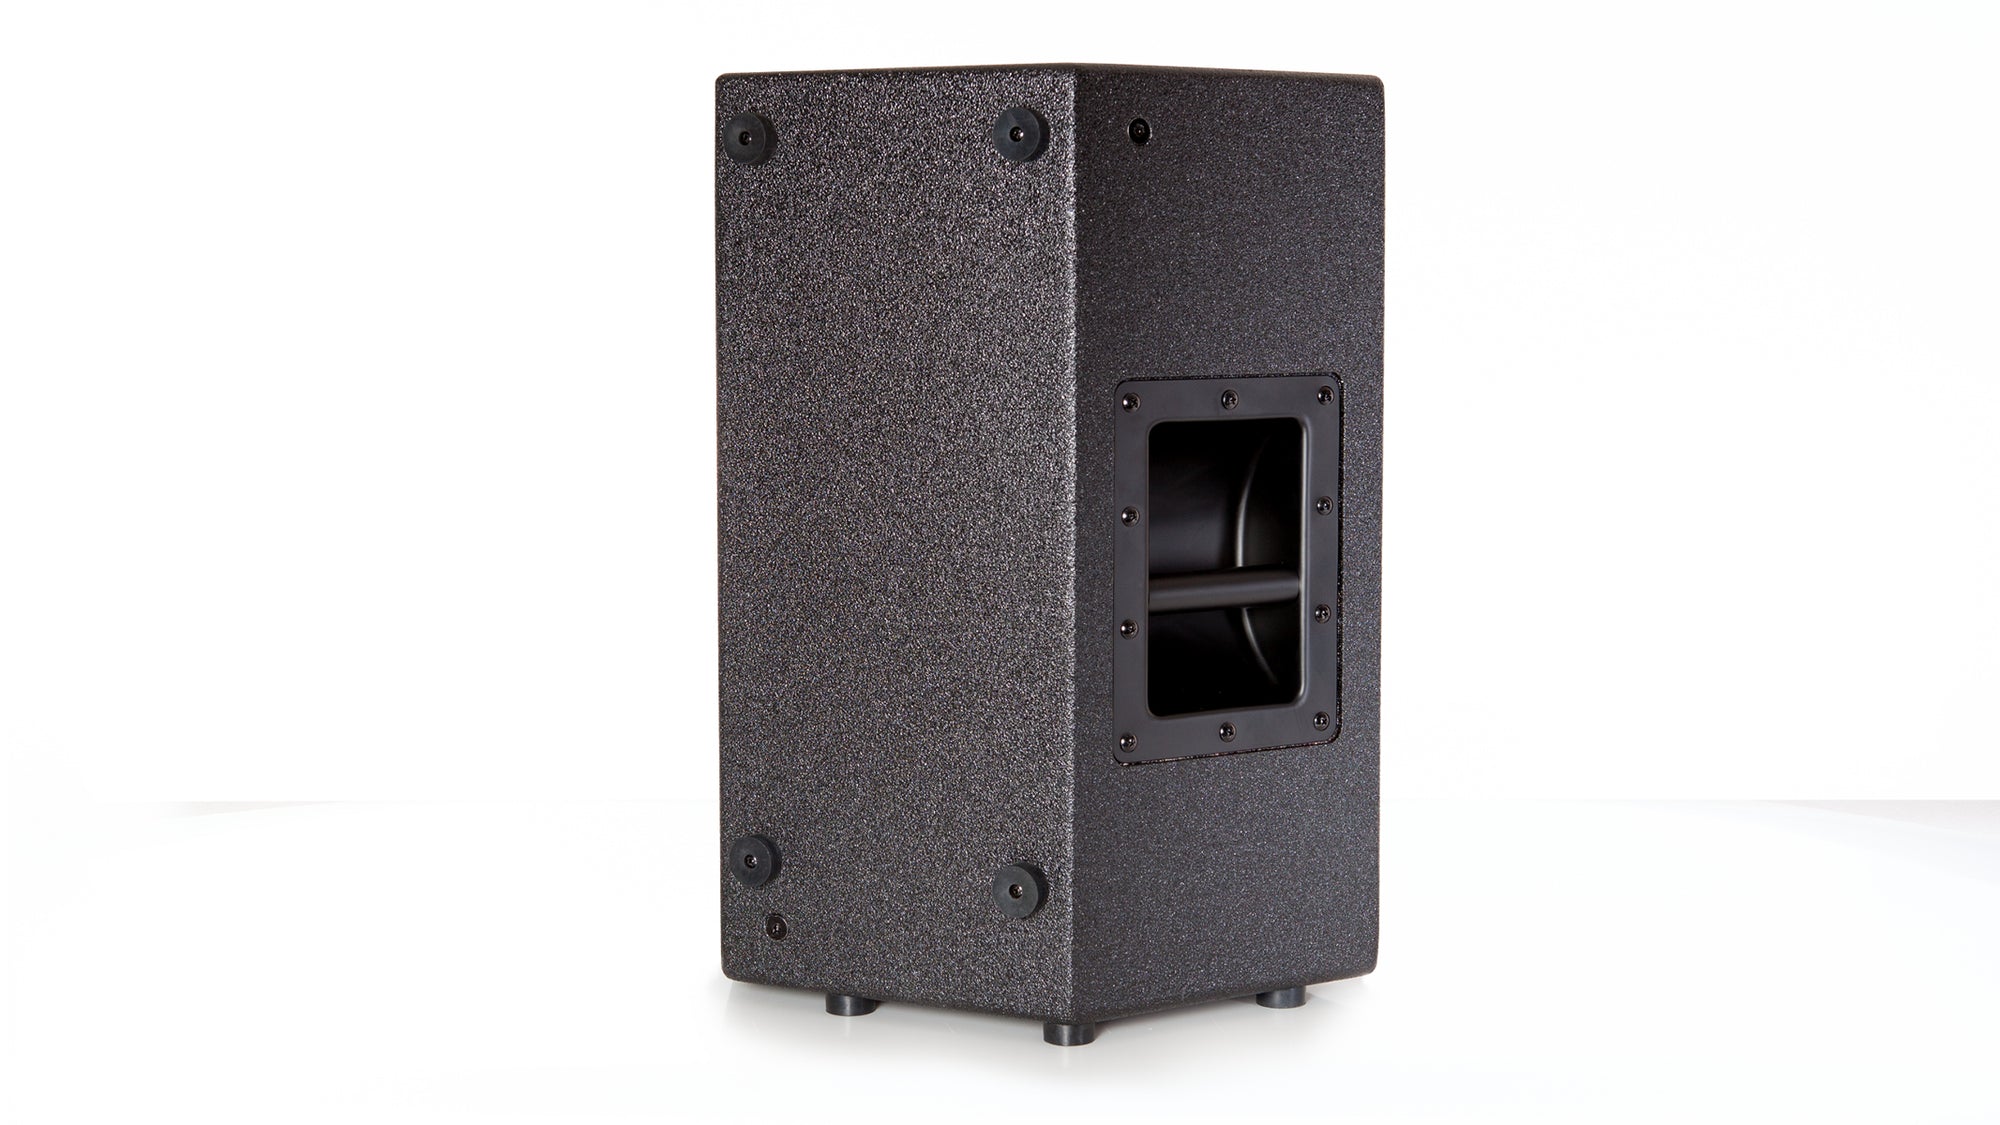 carvin scx12a 1000 watt active main and monitor loudspeaker with dsp